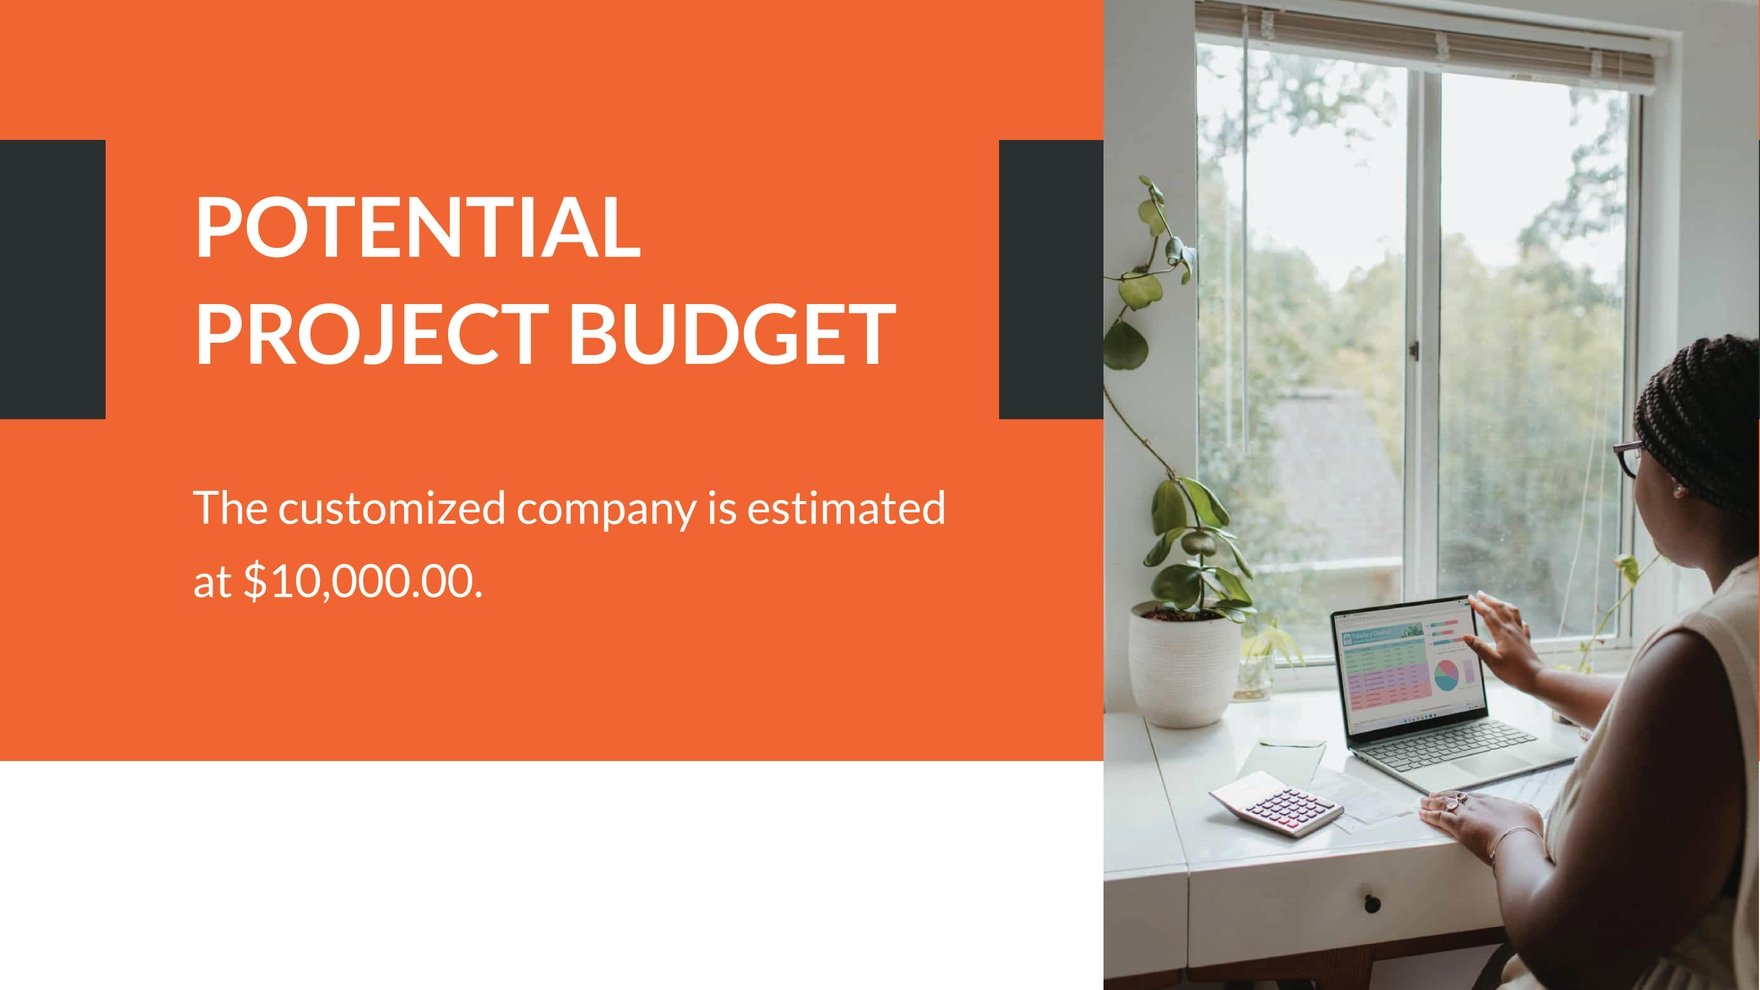 Free Budget Proposal Presentation Template Download in PowerPoint